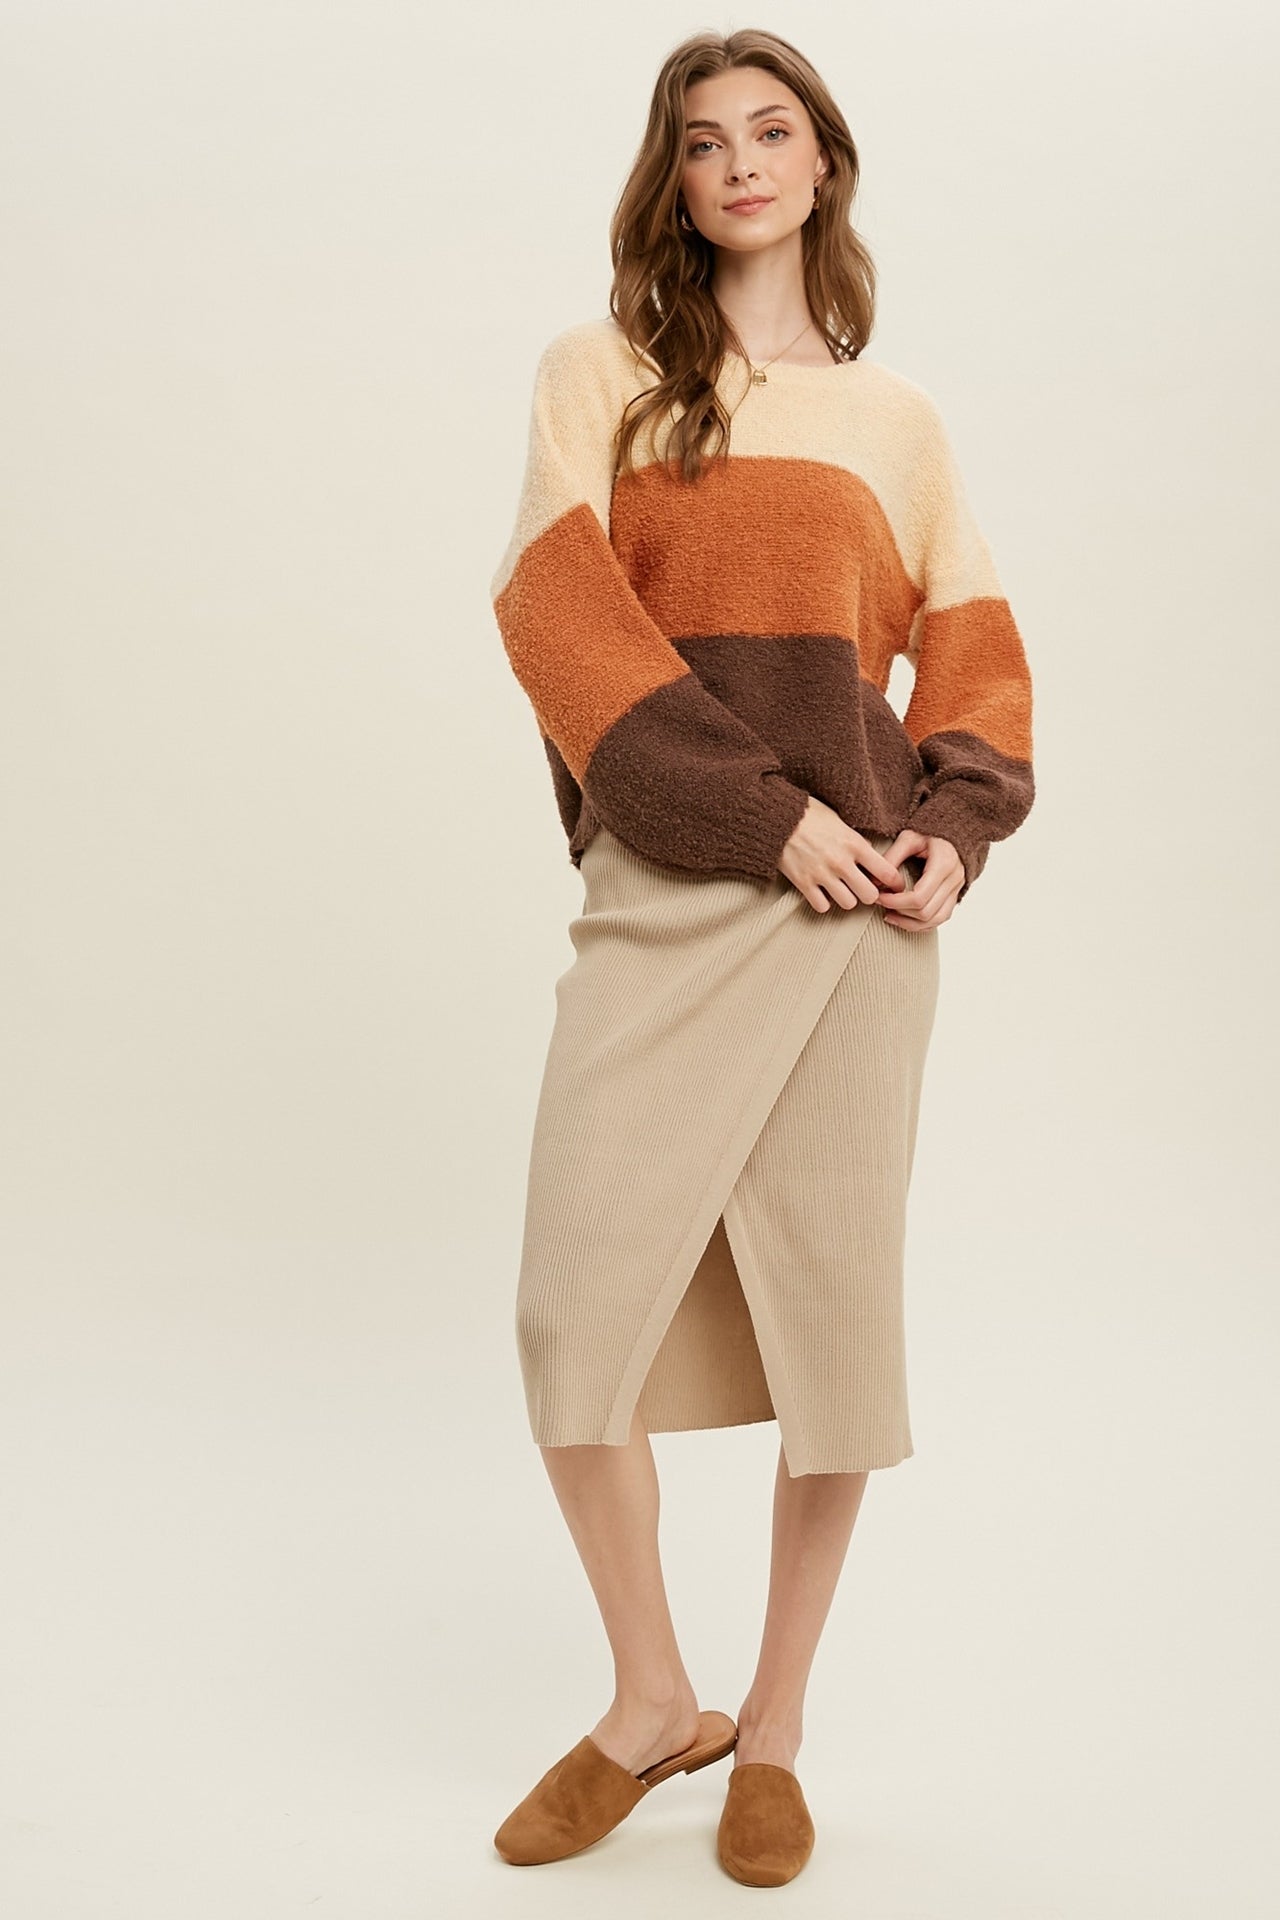 The model is wearing the Colorblock Balloon Sleeve Sweater over a beige skirt.